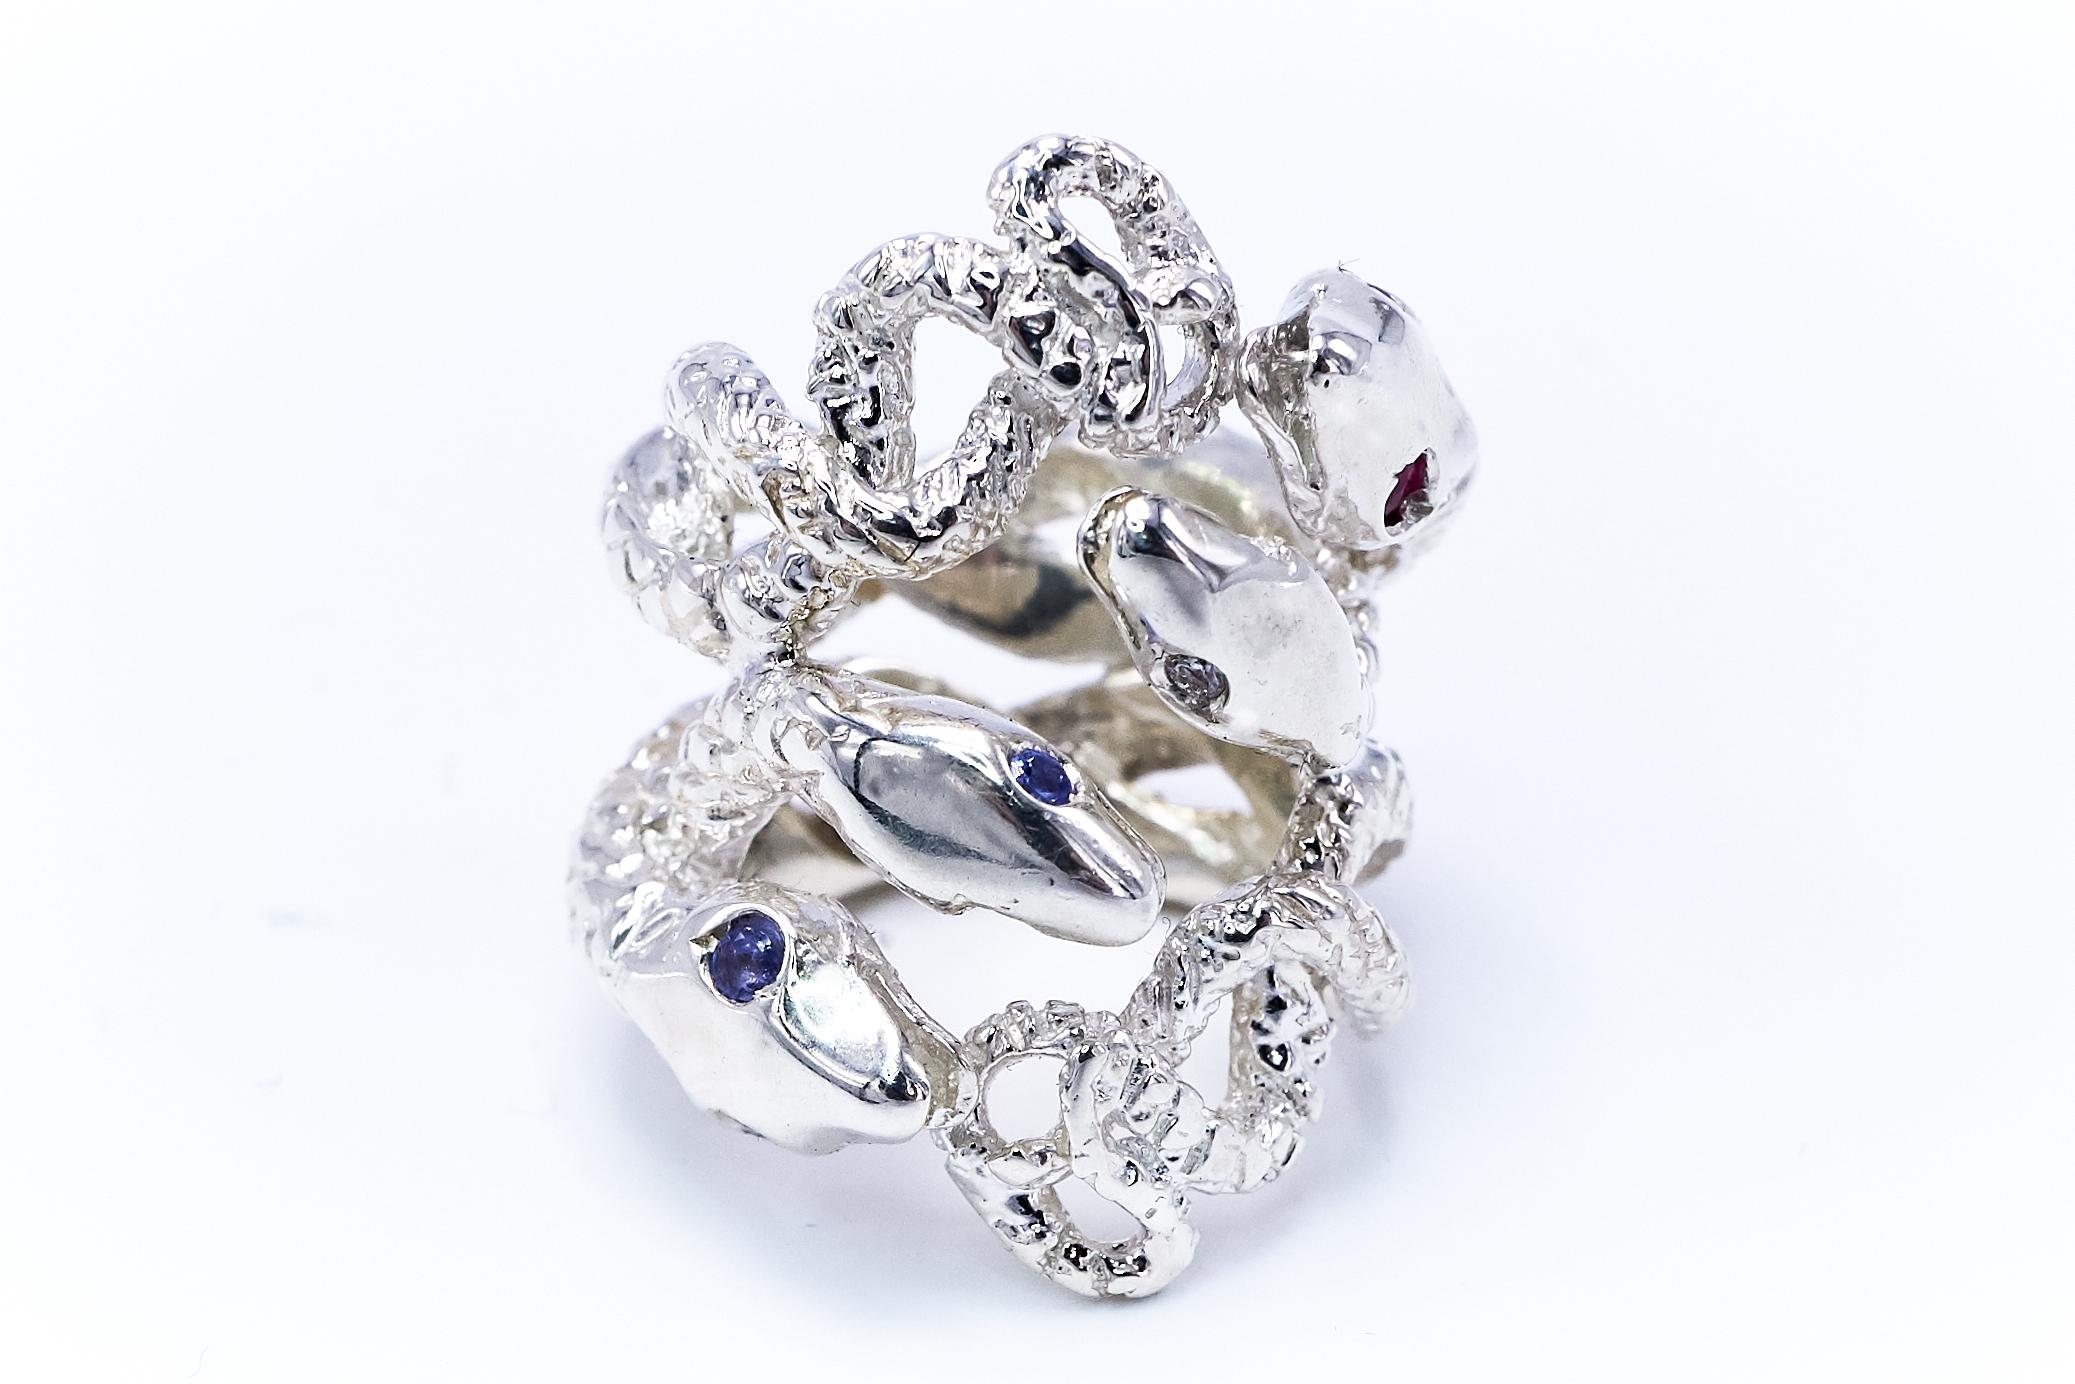 Snake Ring Statement Silver Cocktail Ring White Diamond Ruby Tanzanite J Dauphin For Sale 2